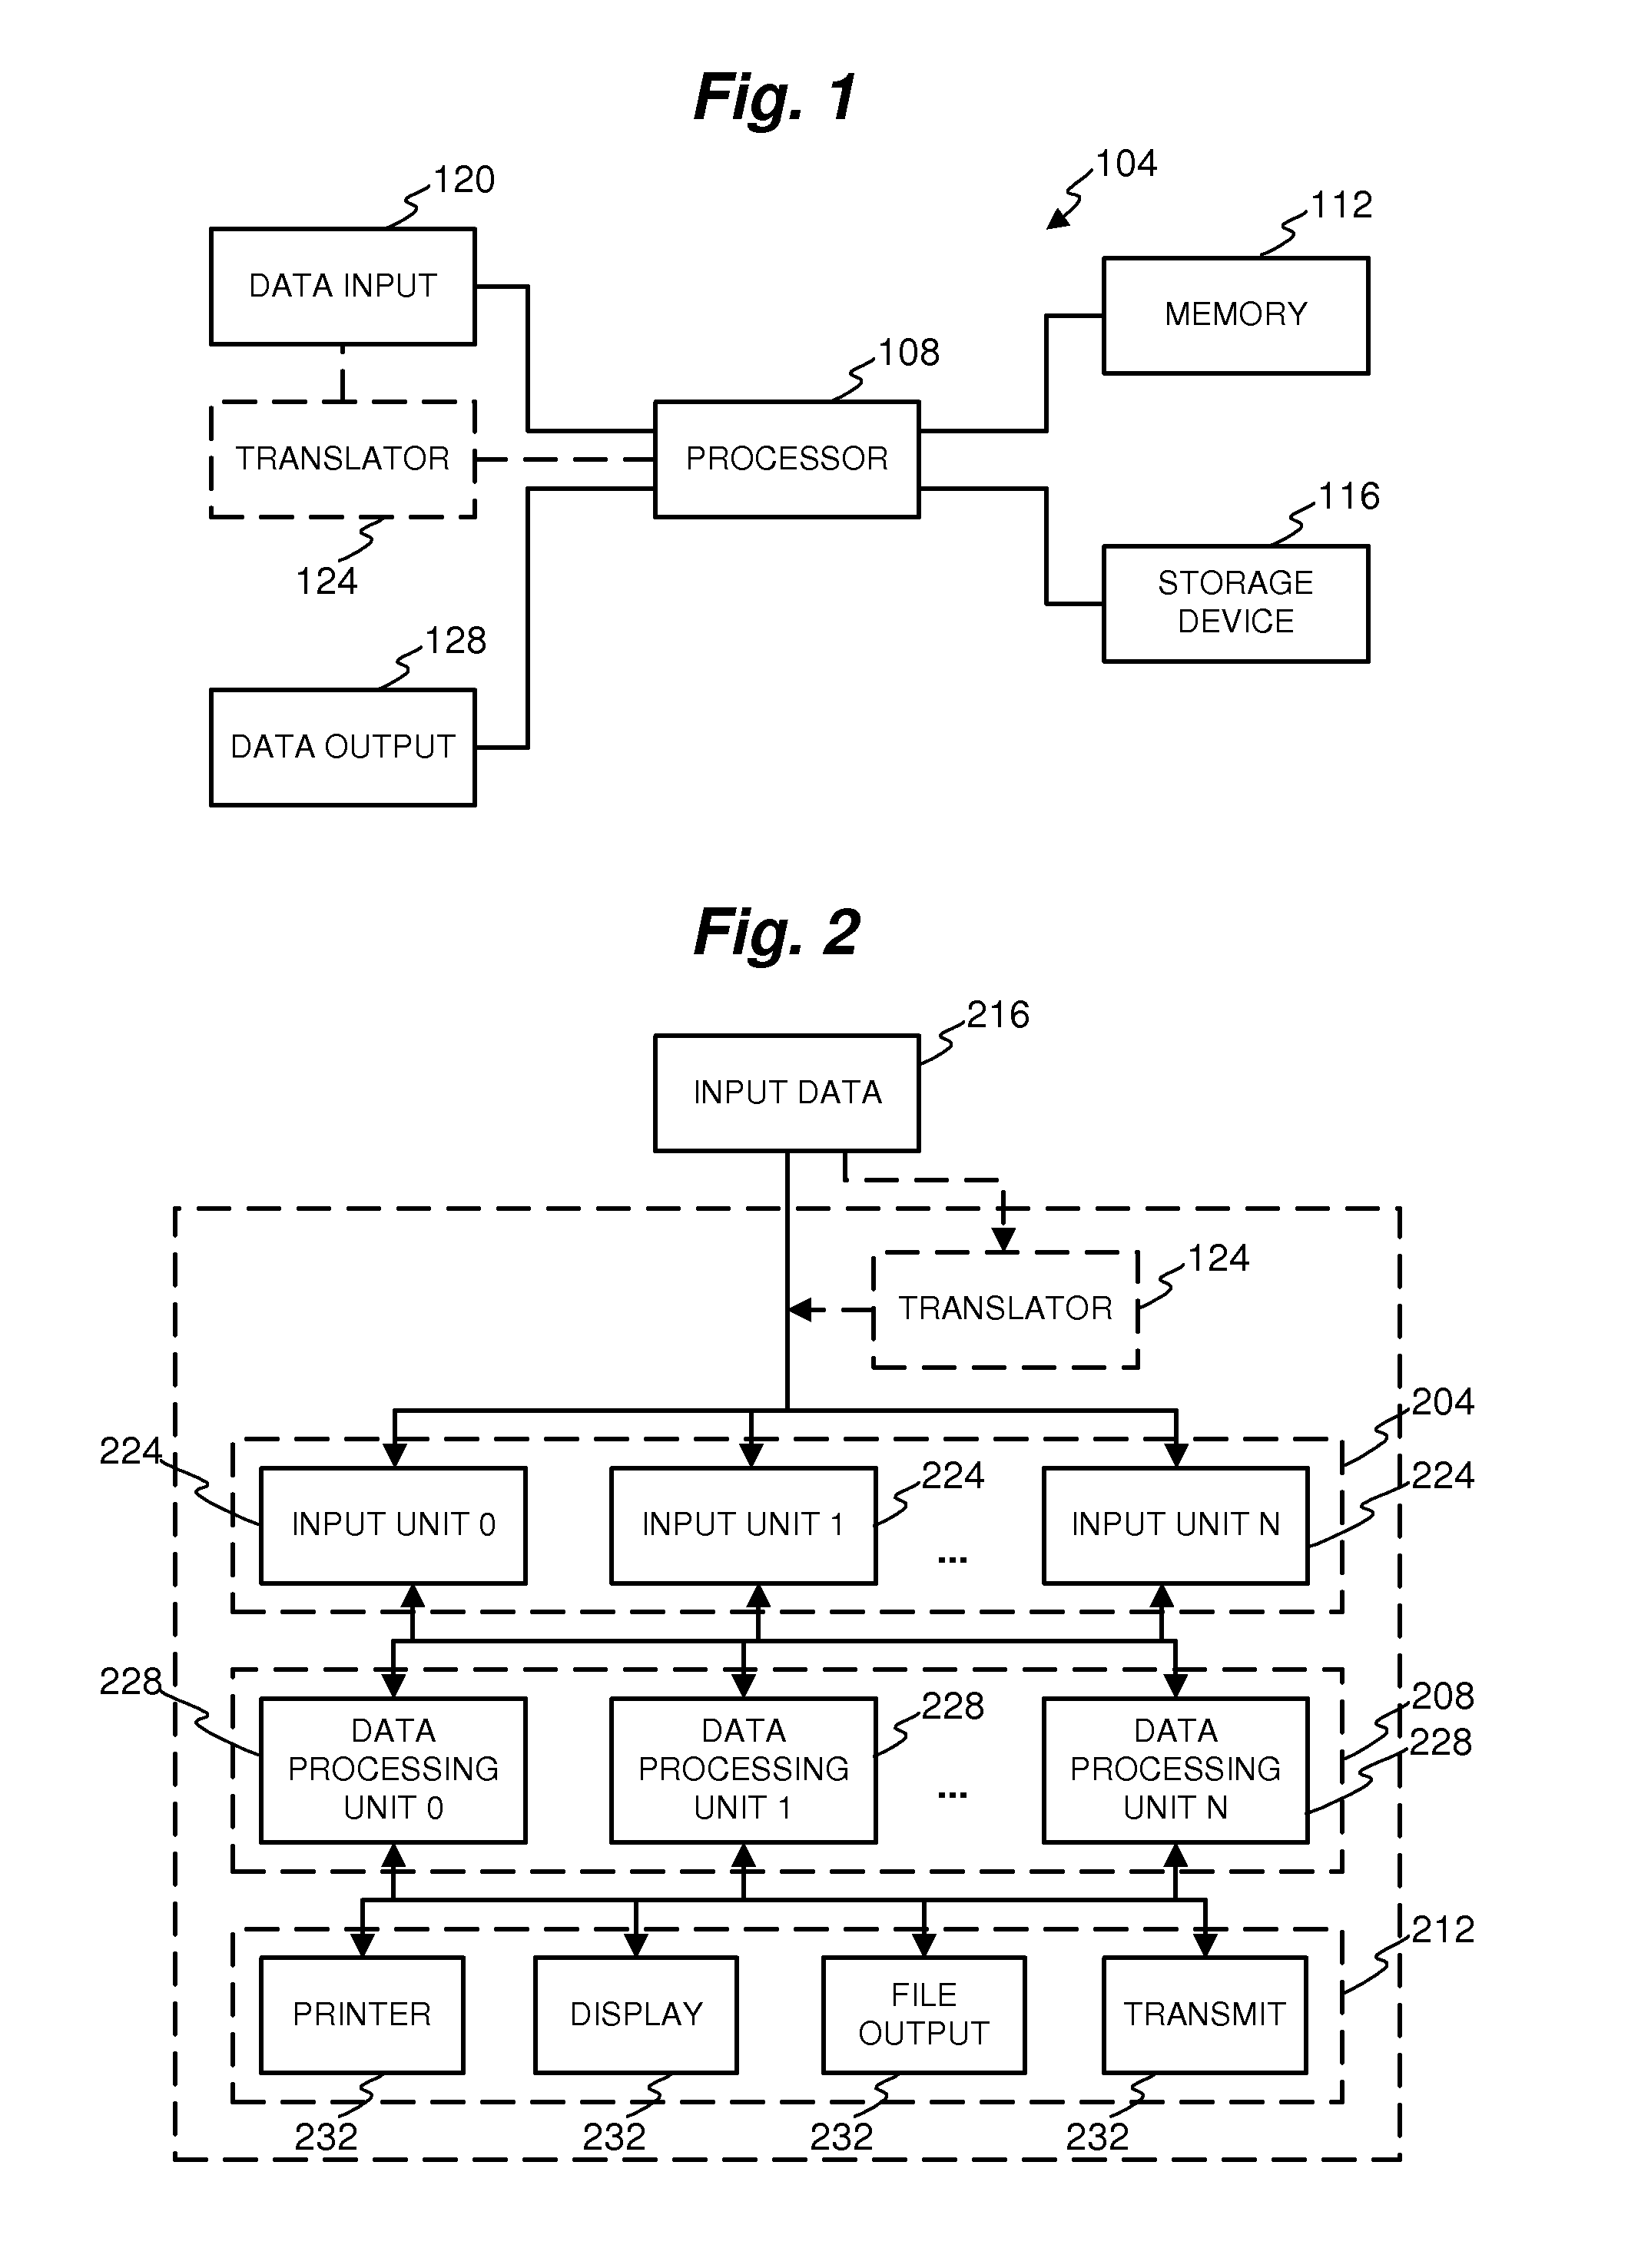 Qualification system and method for chilled water plant operations